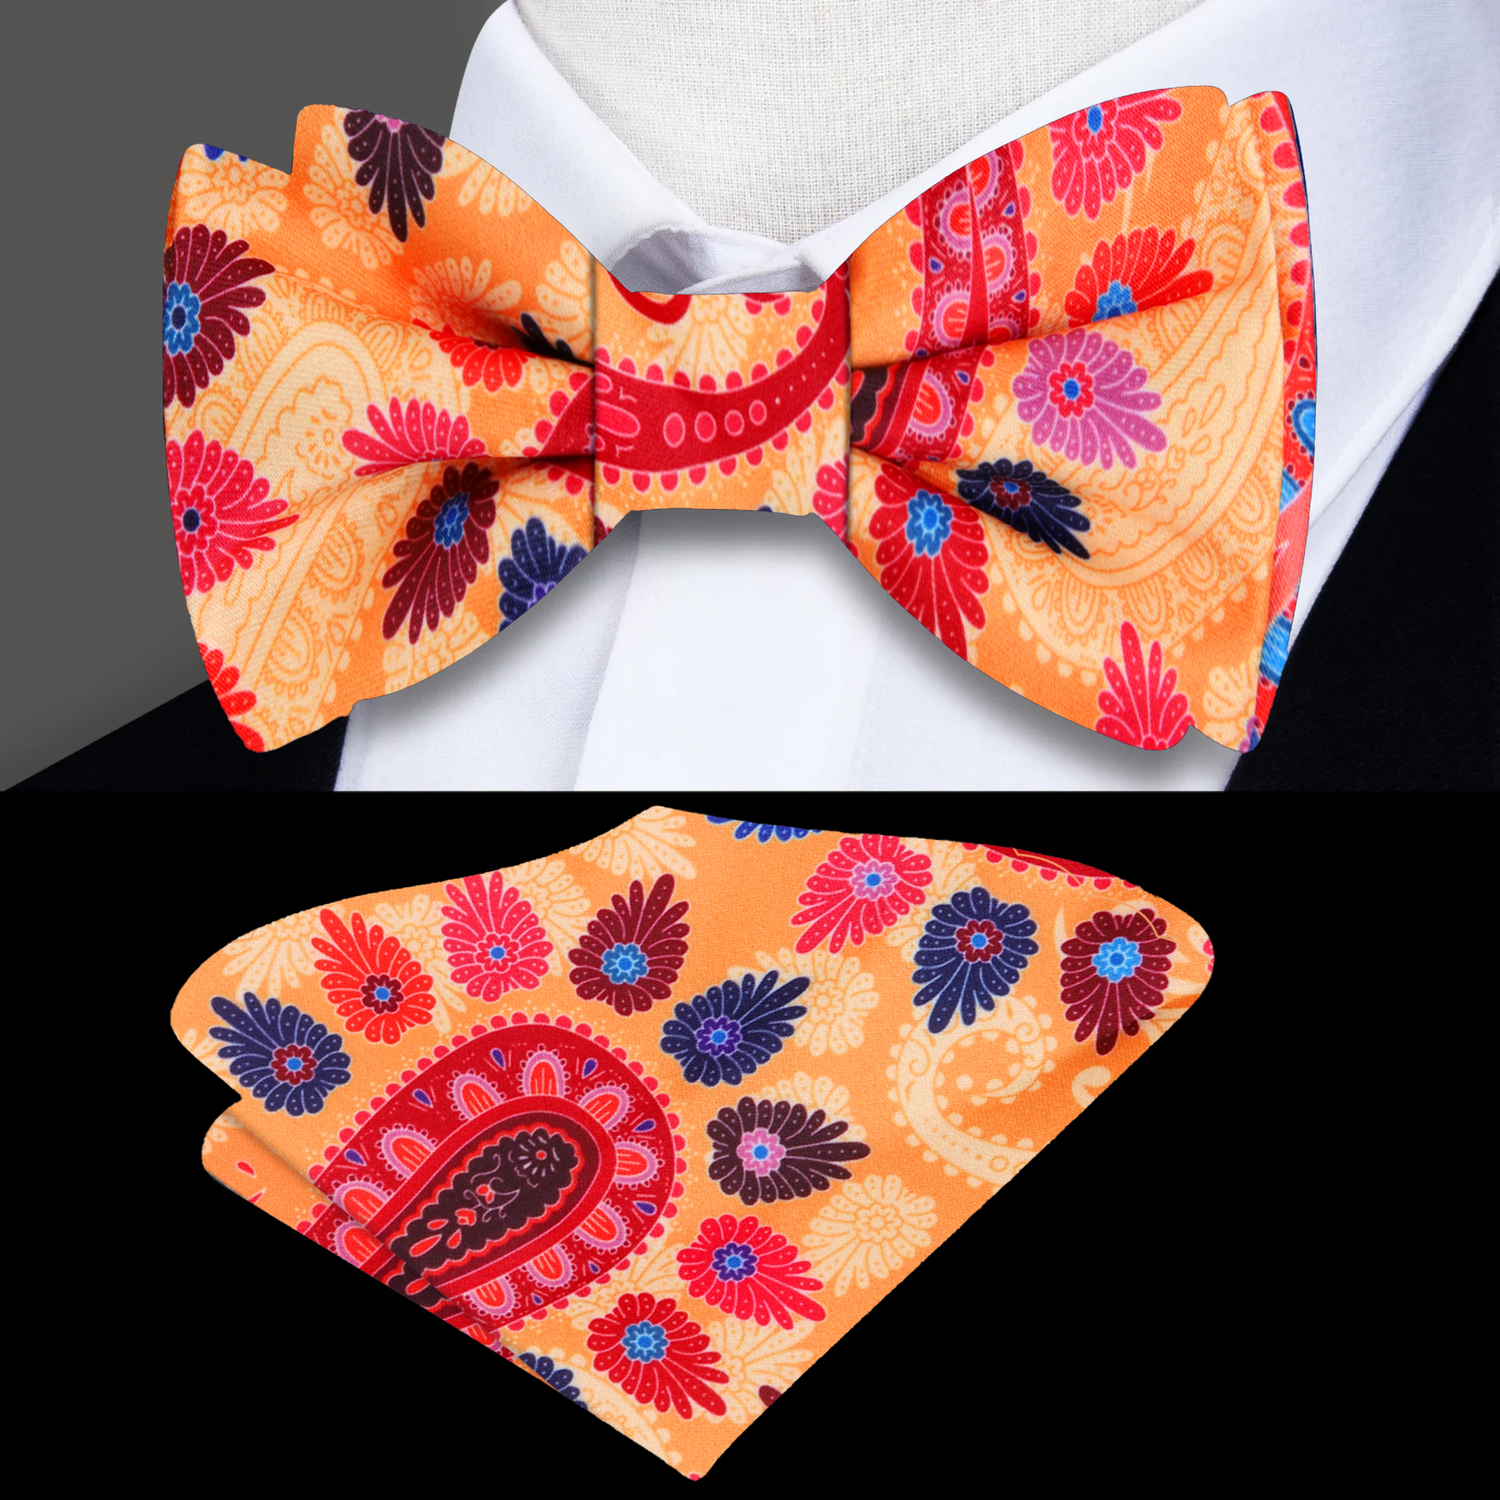 An Orange, Red, Blue, Purple, Pink Paisley Silk Bow Tie, Pocket Square